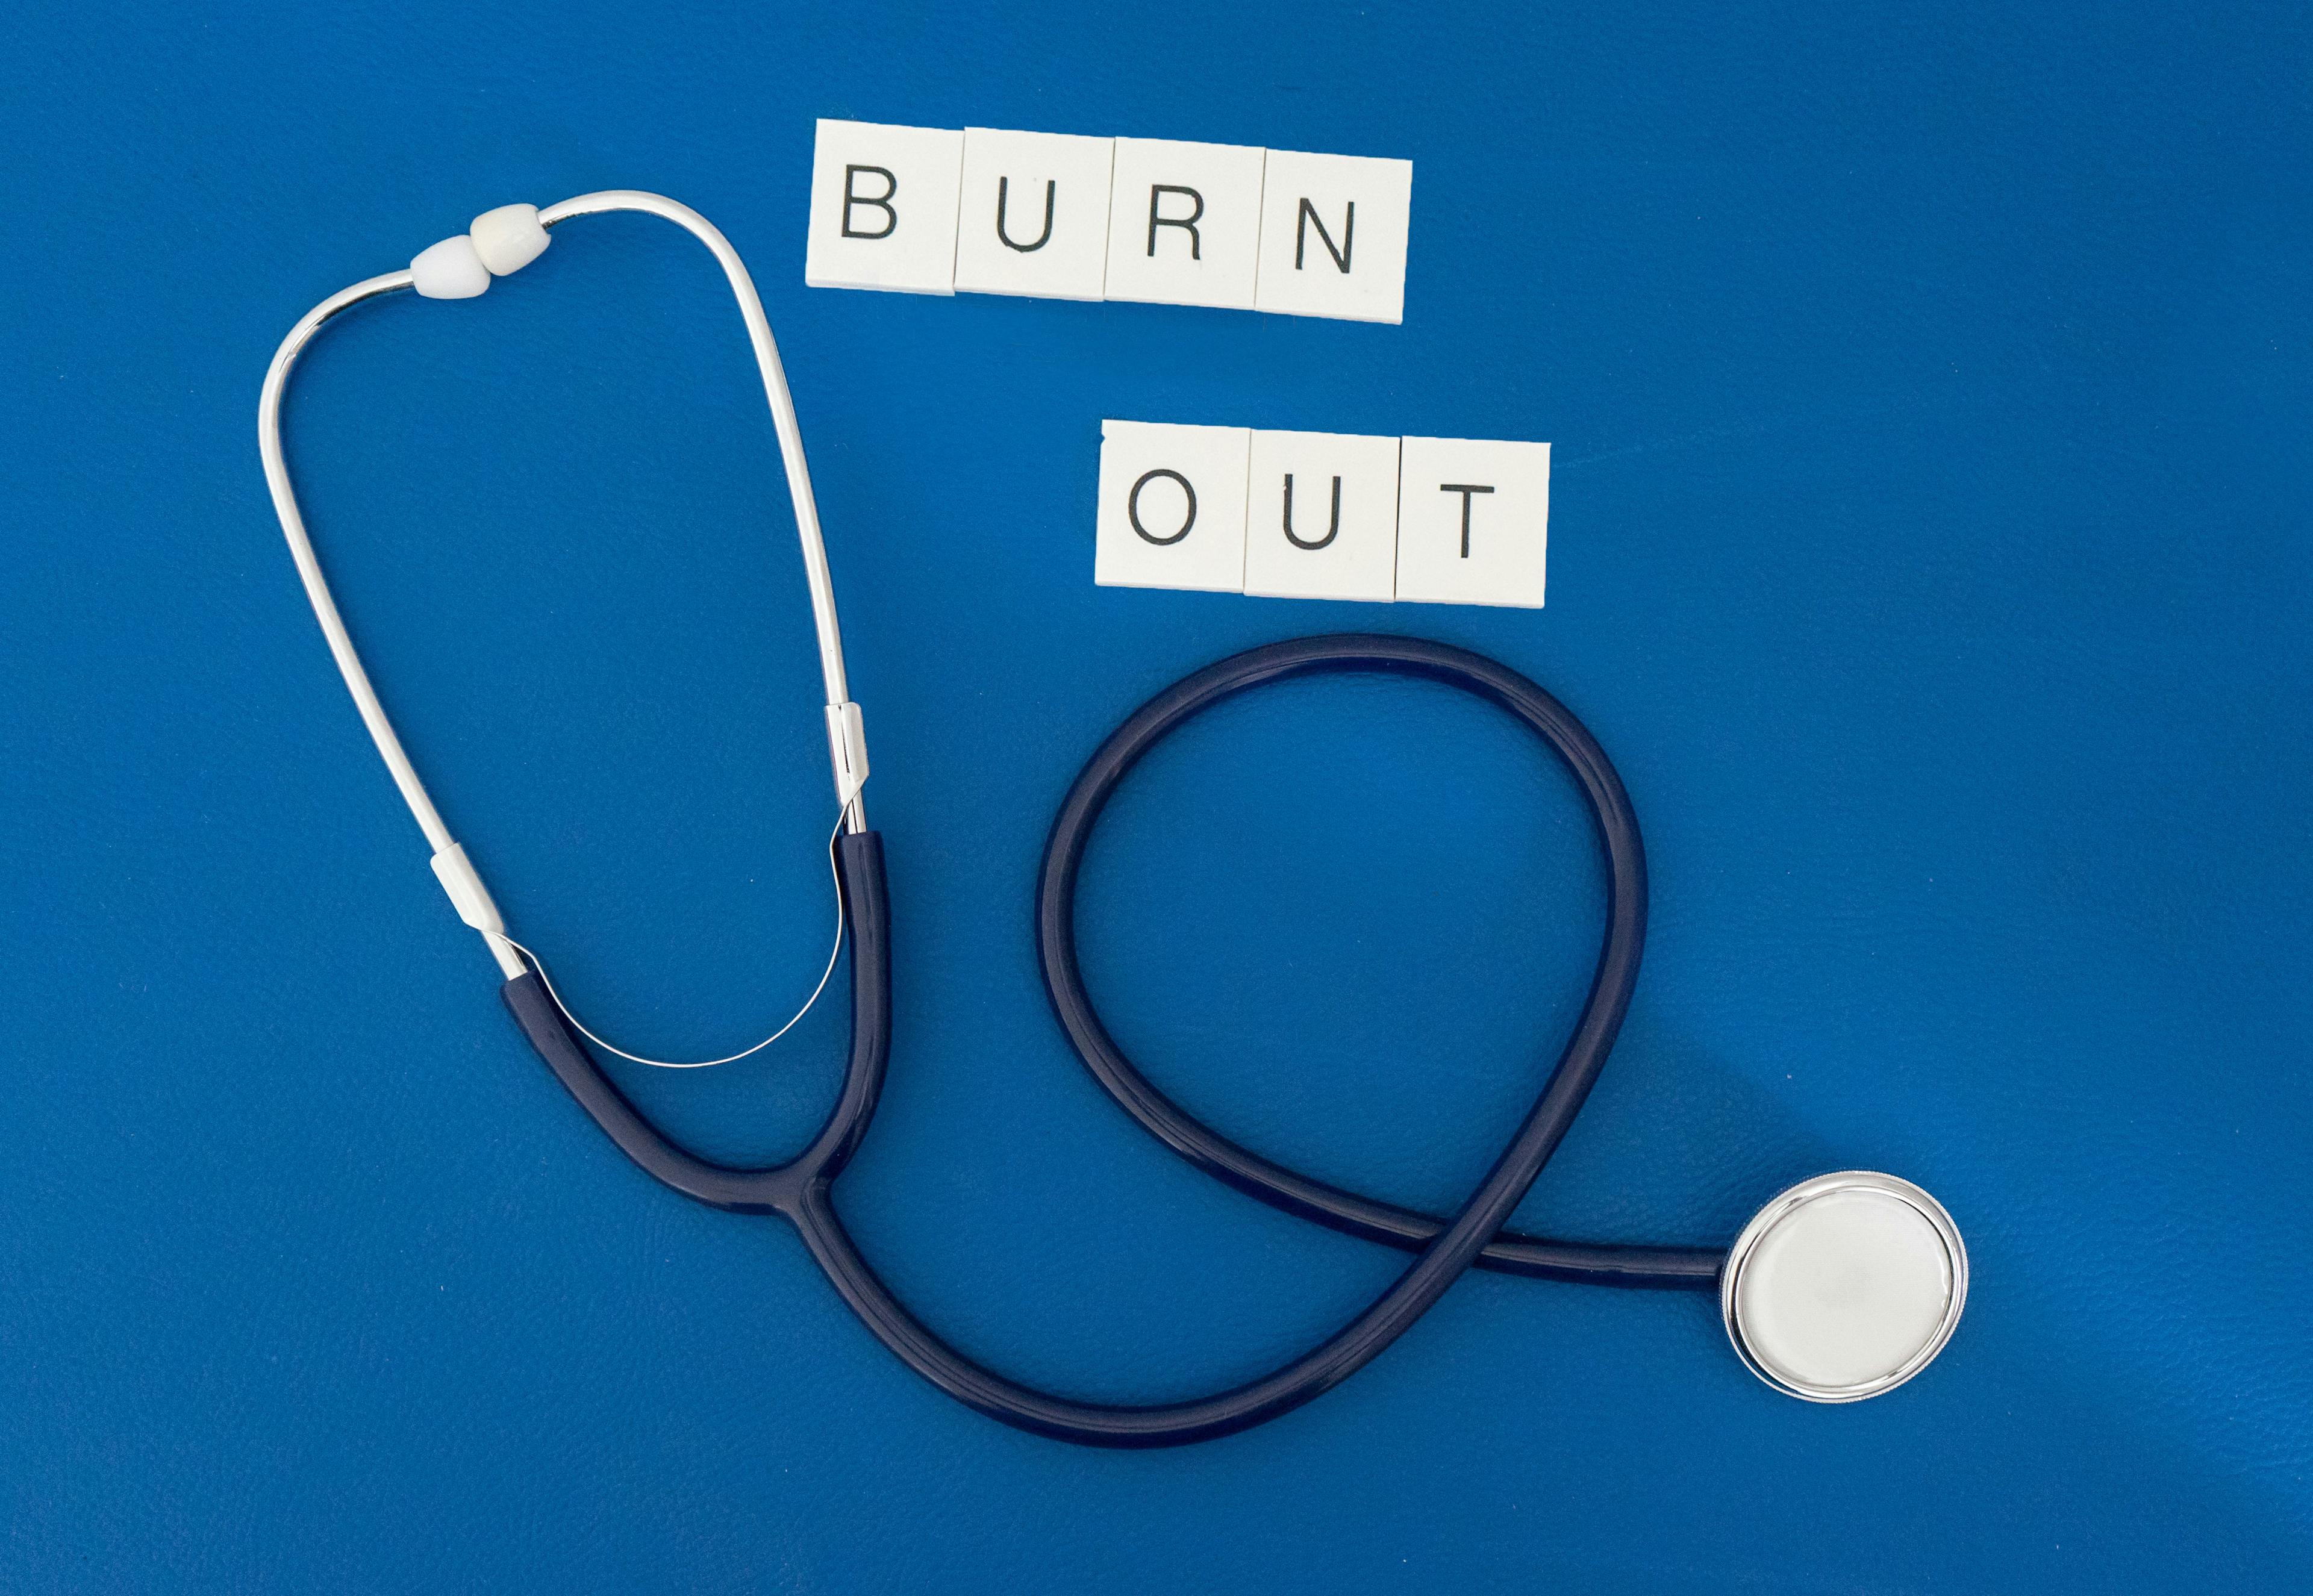 Congress Passes Bill to Battle Burnout and Prevent Physician Suicide